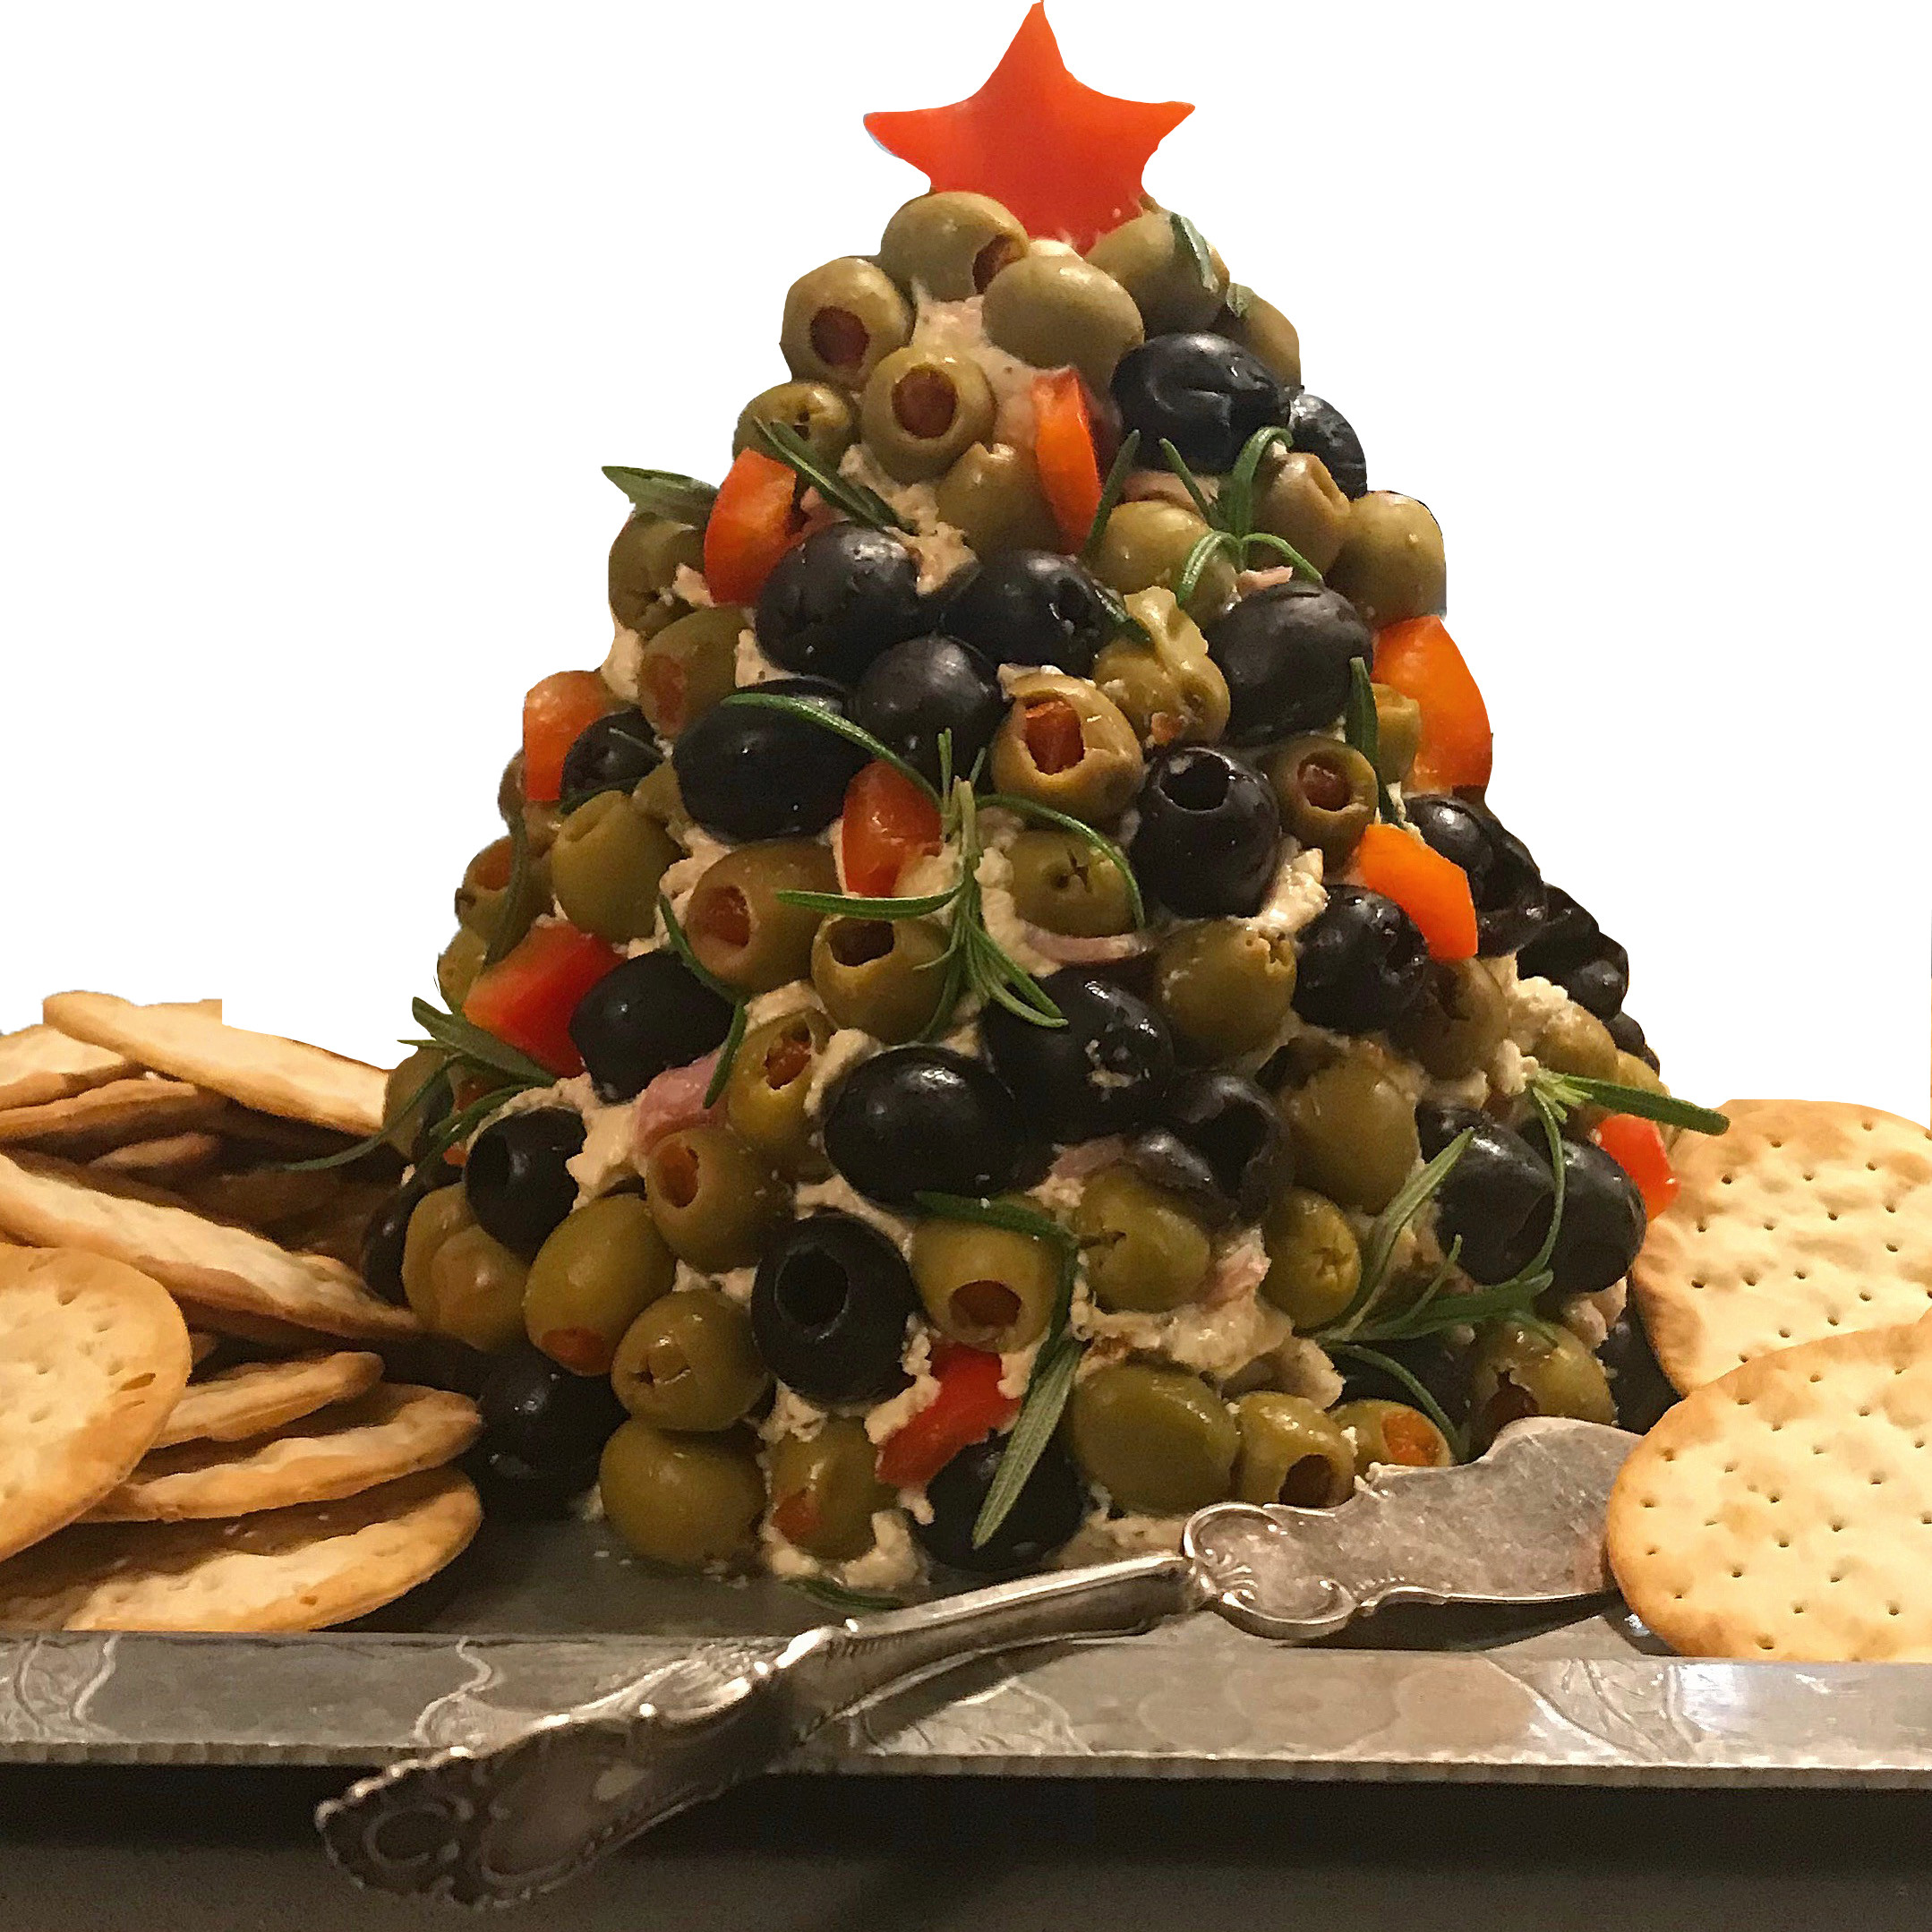 Antipasto Cheese Ball Christmas Tree
 The Holidays and Festivities are here